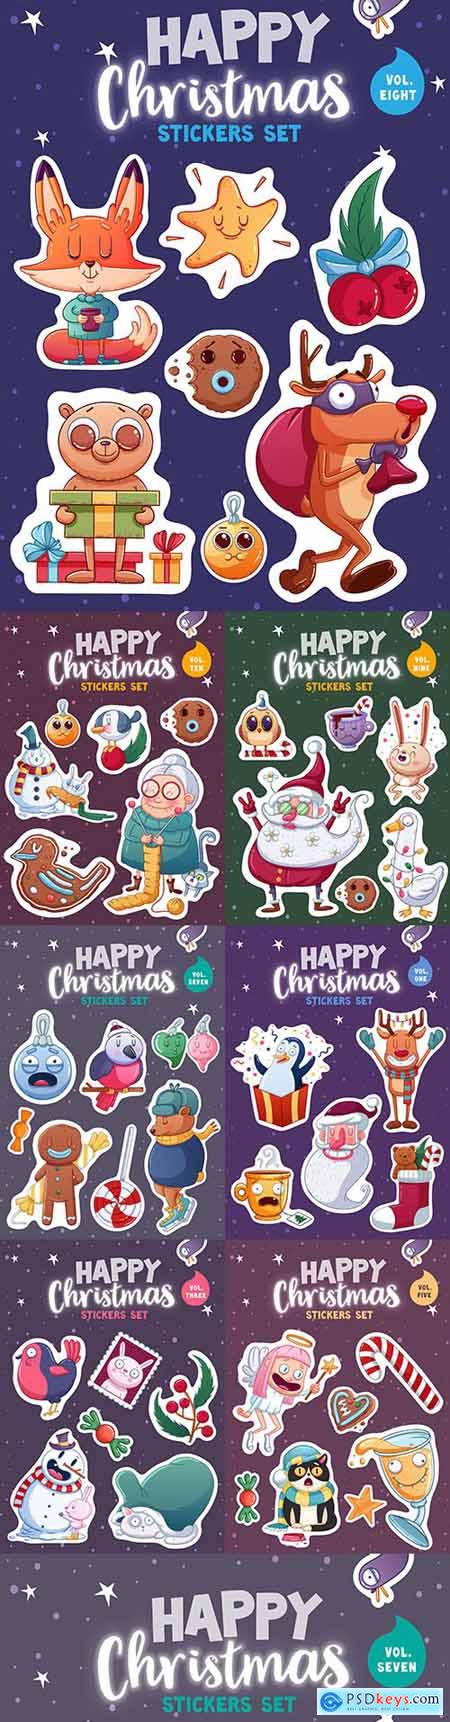 Merry Christmas set stickers or magnets festive souvenirs 2